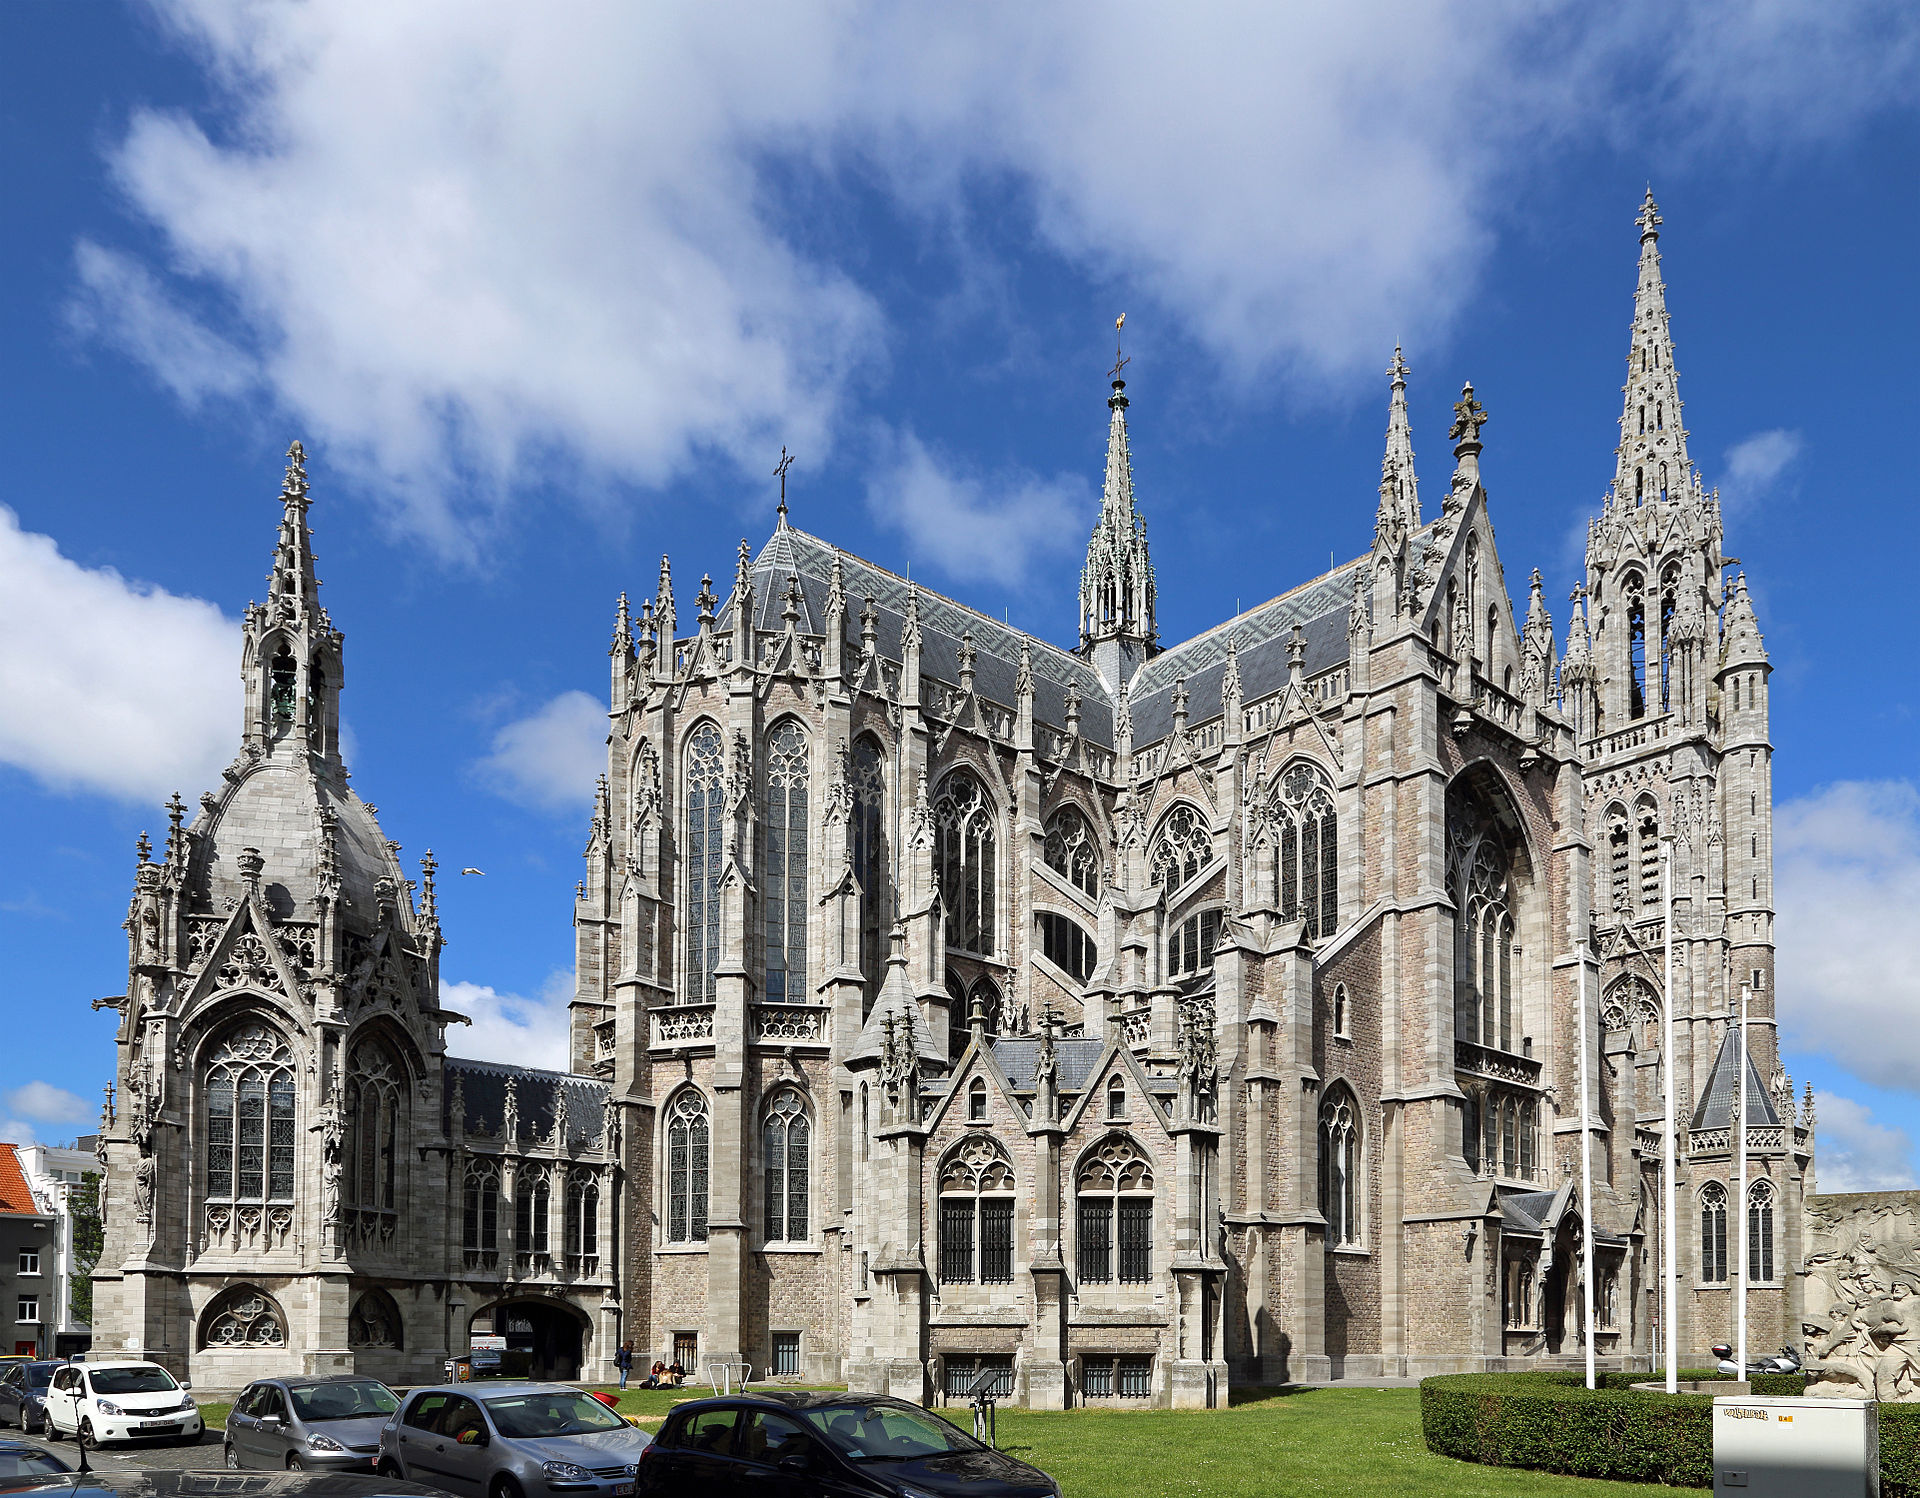 A Guide to Neo-Gothic Architecture: What Is It and How Does It